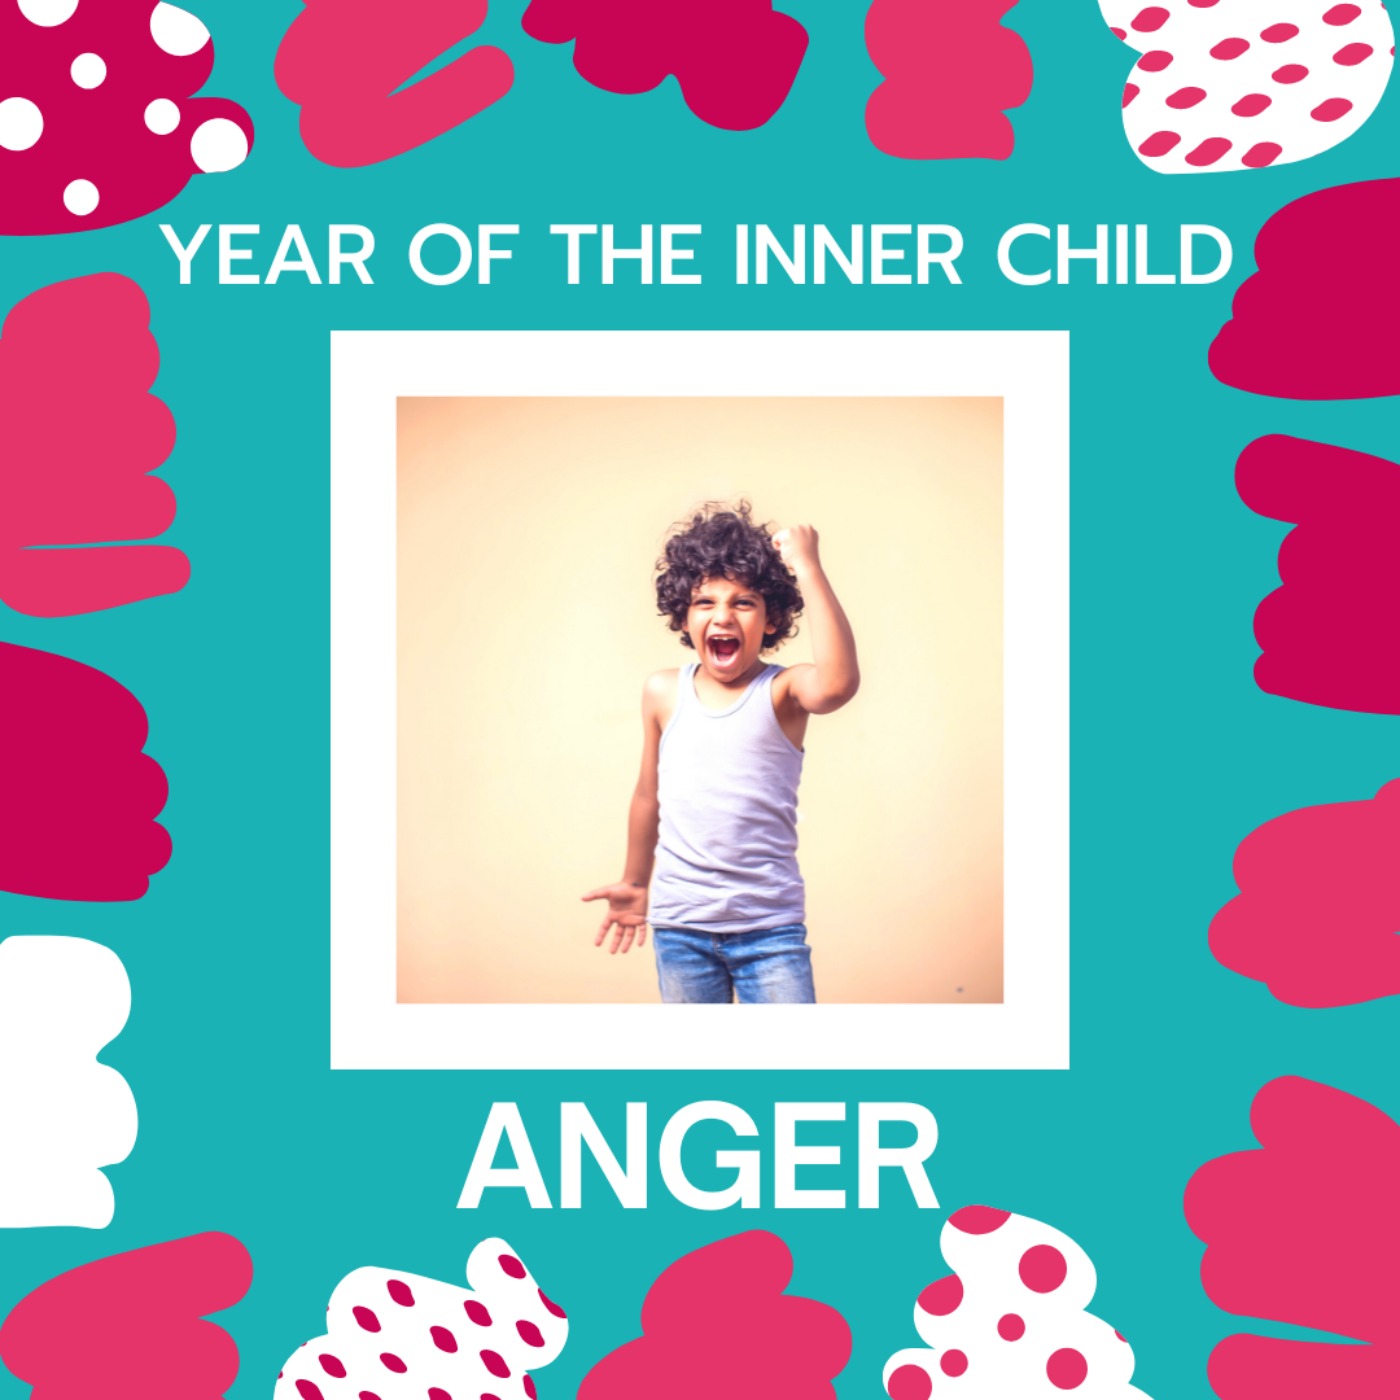 Year of the Inner Child: Anger